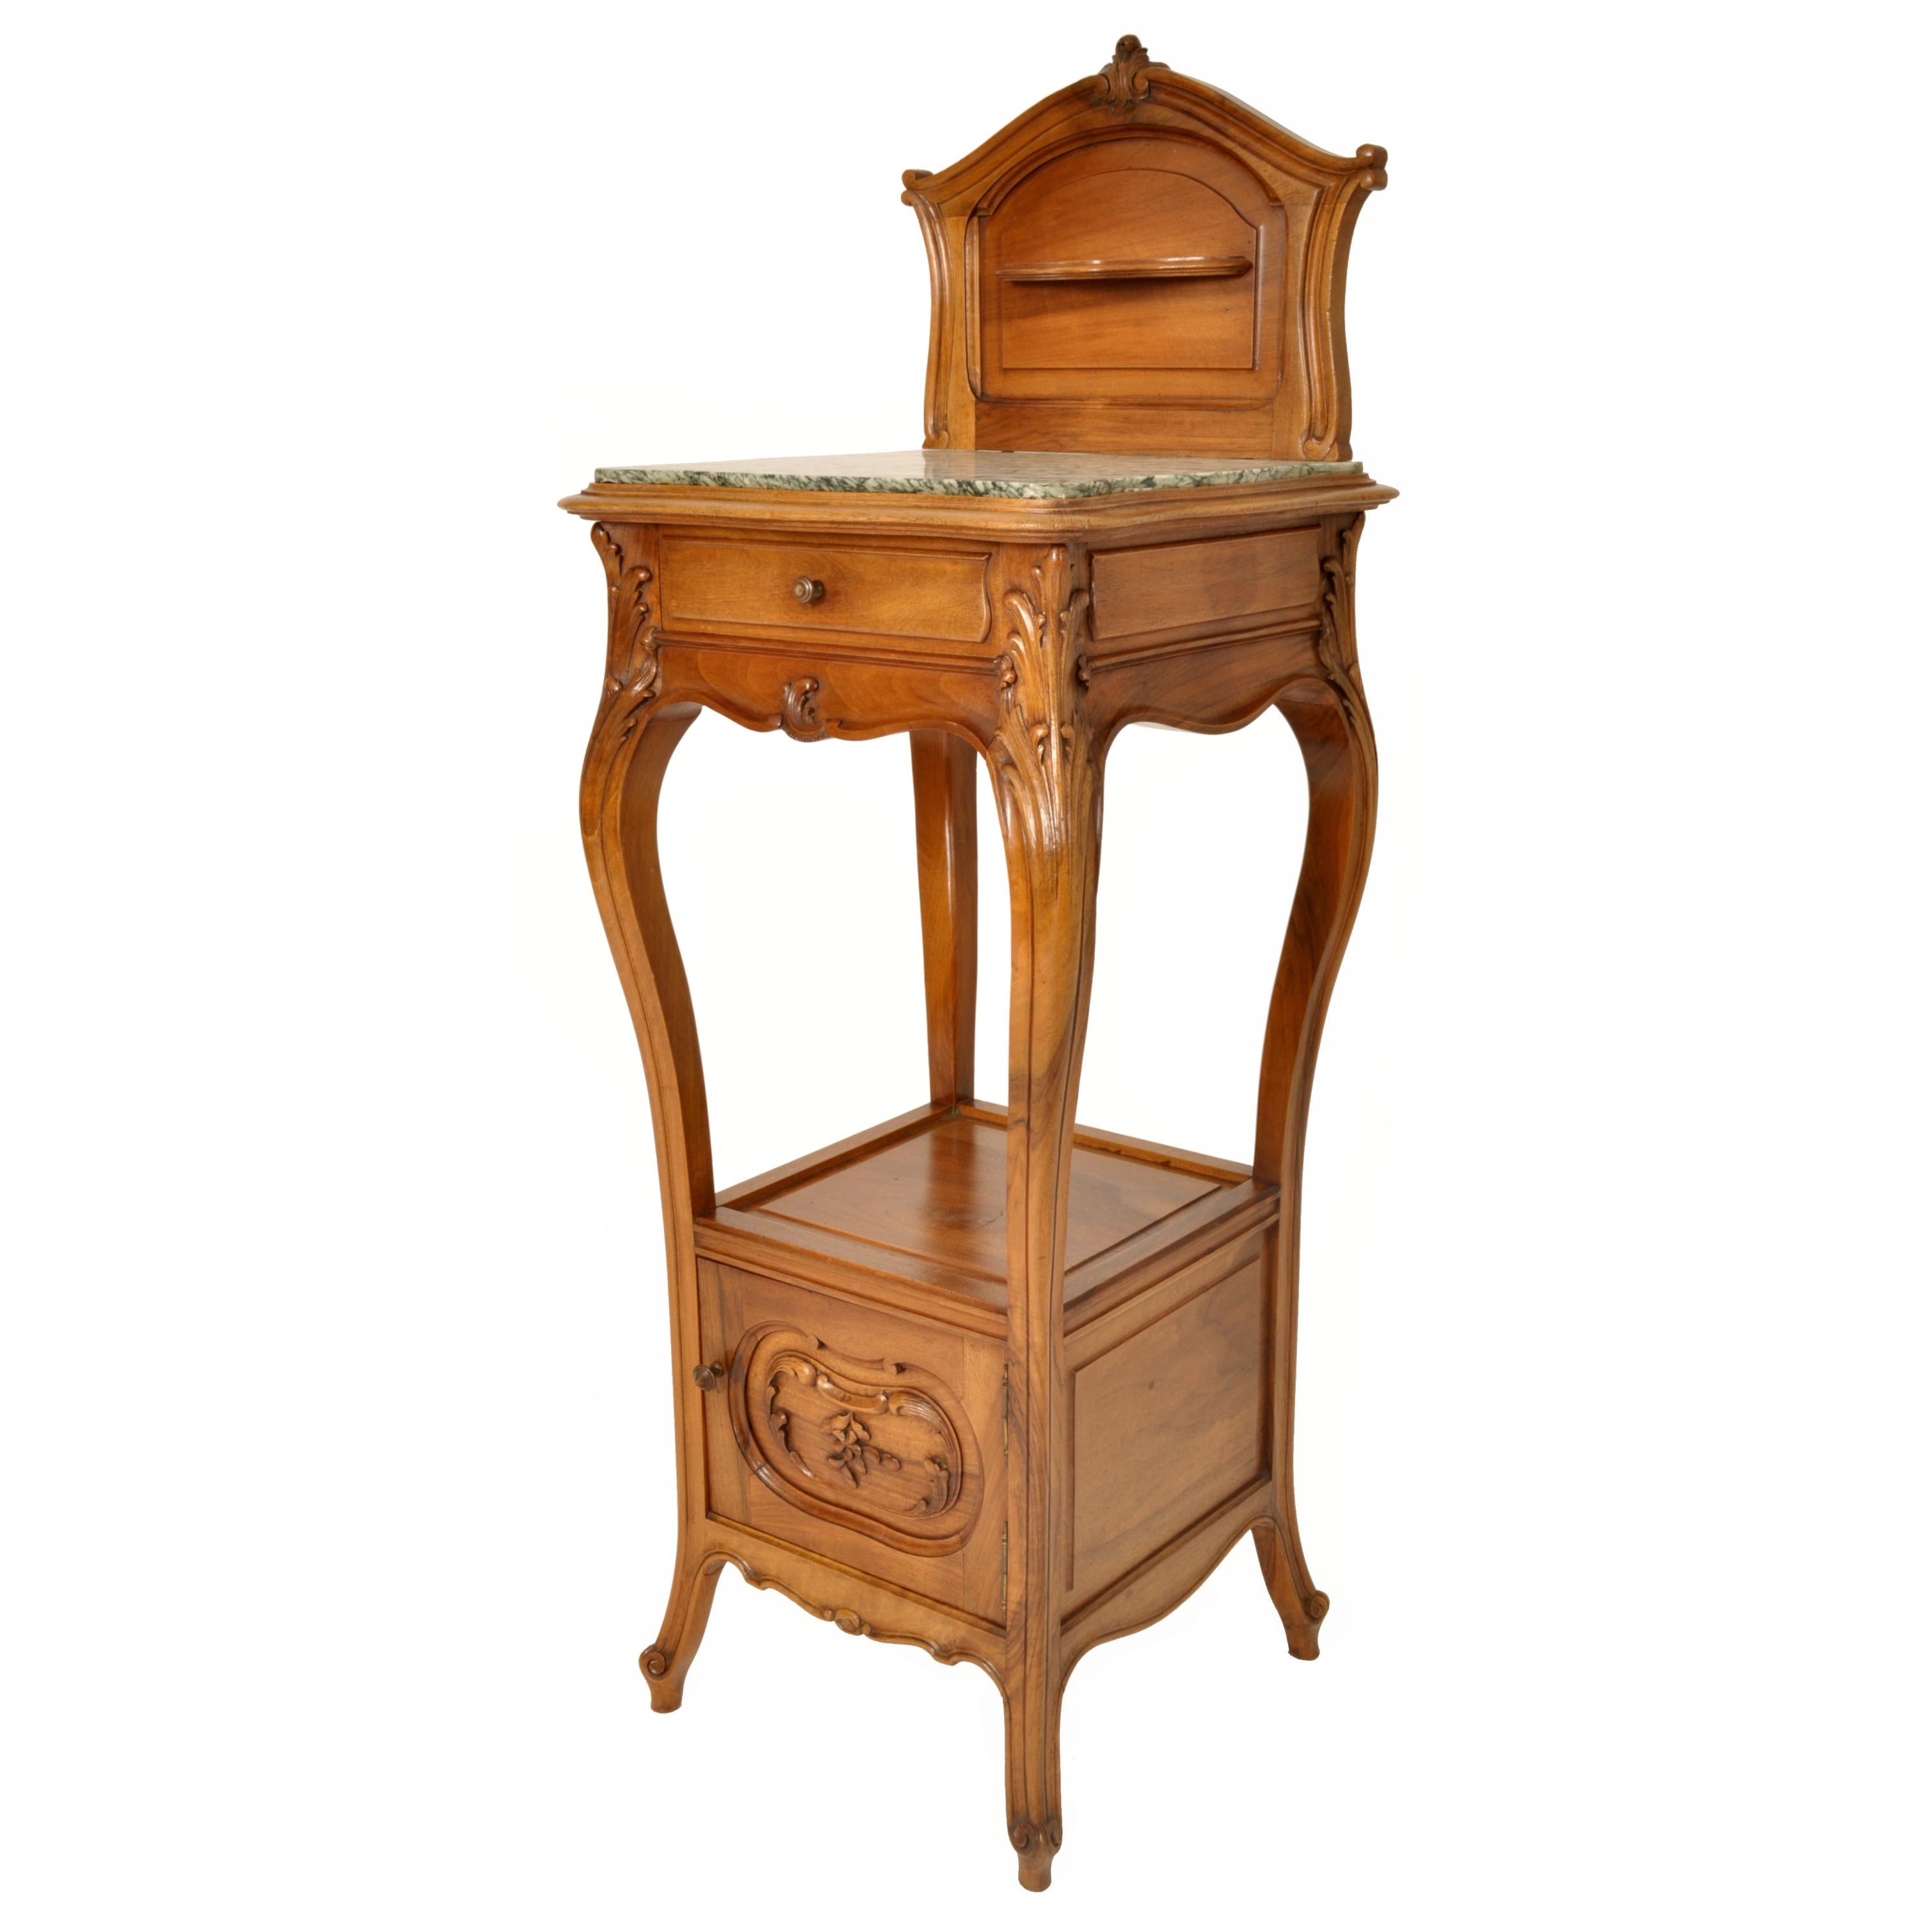 Carved Antique French Provincial Art Nouveau Walnut & Marble Nightstand Side Table 1900